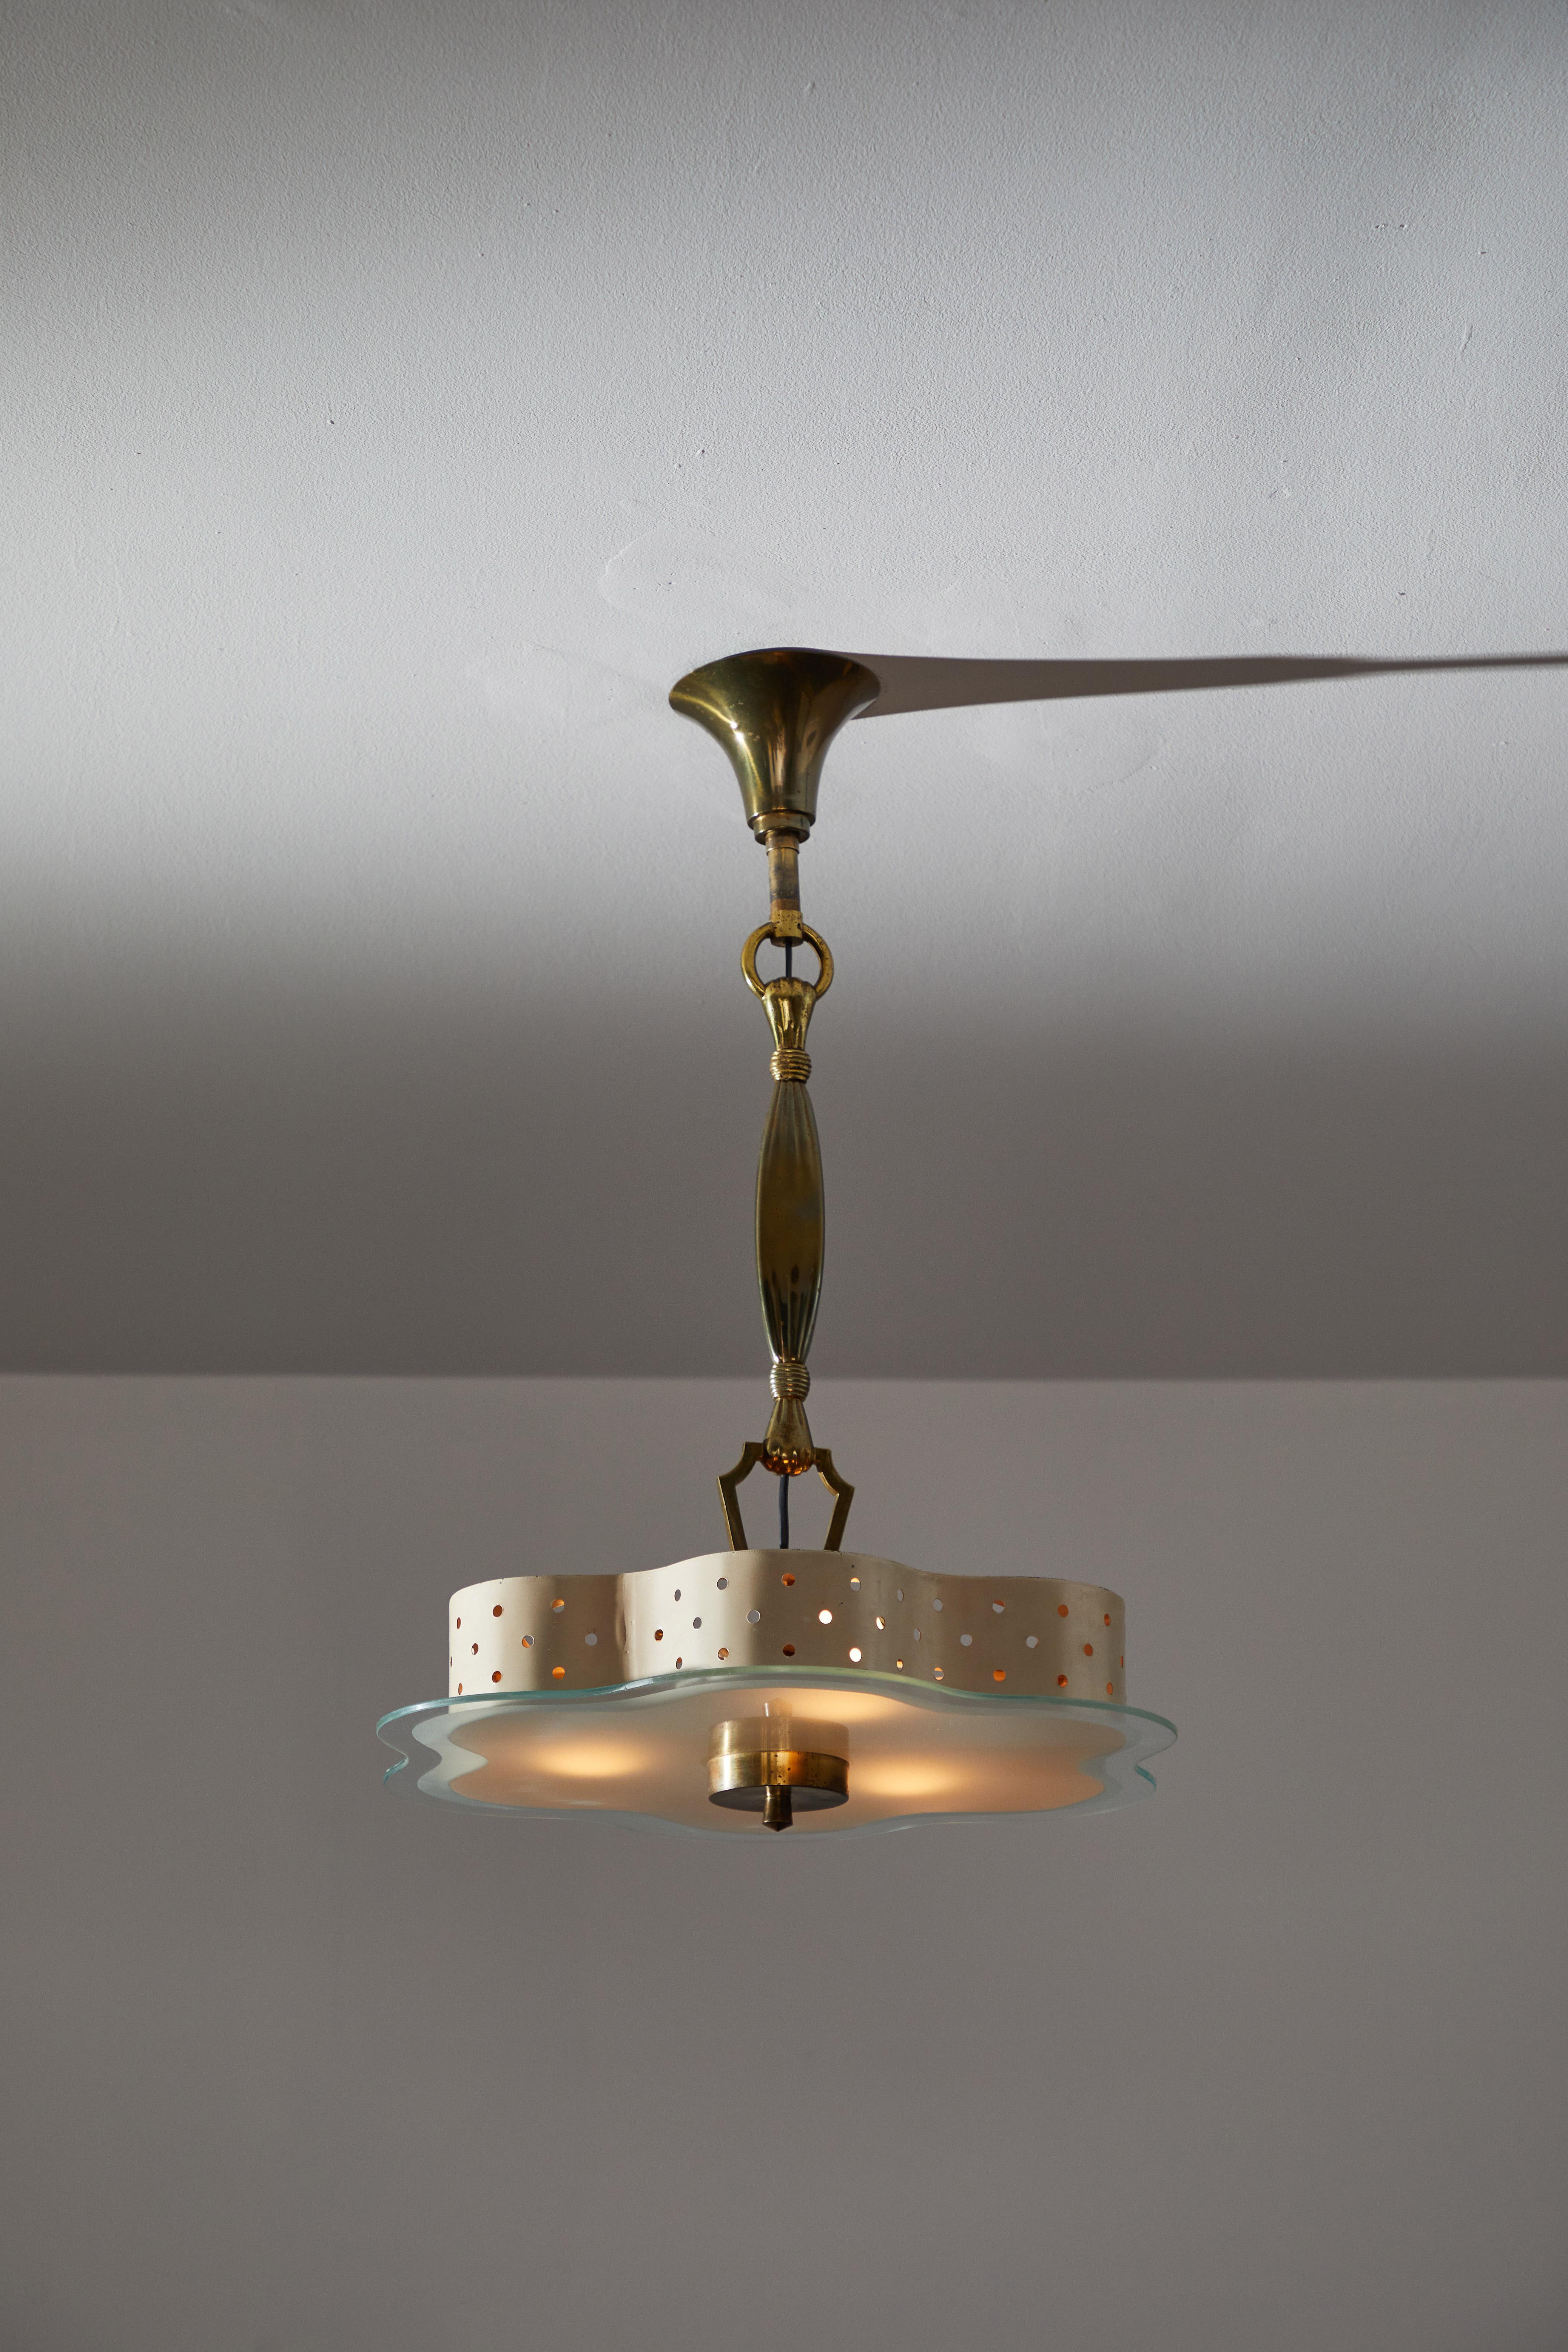 Suspension light by Lunel. Manufactured in France, circa 1950s. Rewired for U.S. standards. Glass, original enameled aluminum finish. Cast brass hands detail supporting the frame. This fixture has three sockets. We recommend three E27 25-60w maximum